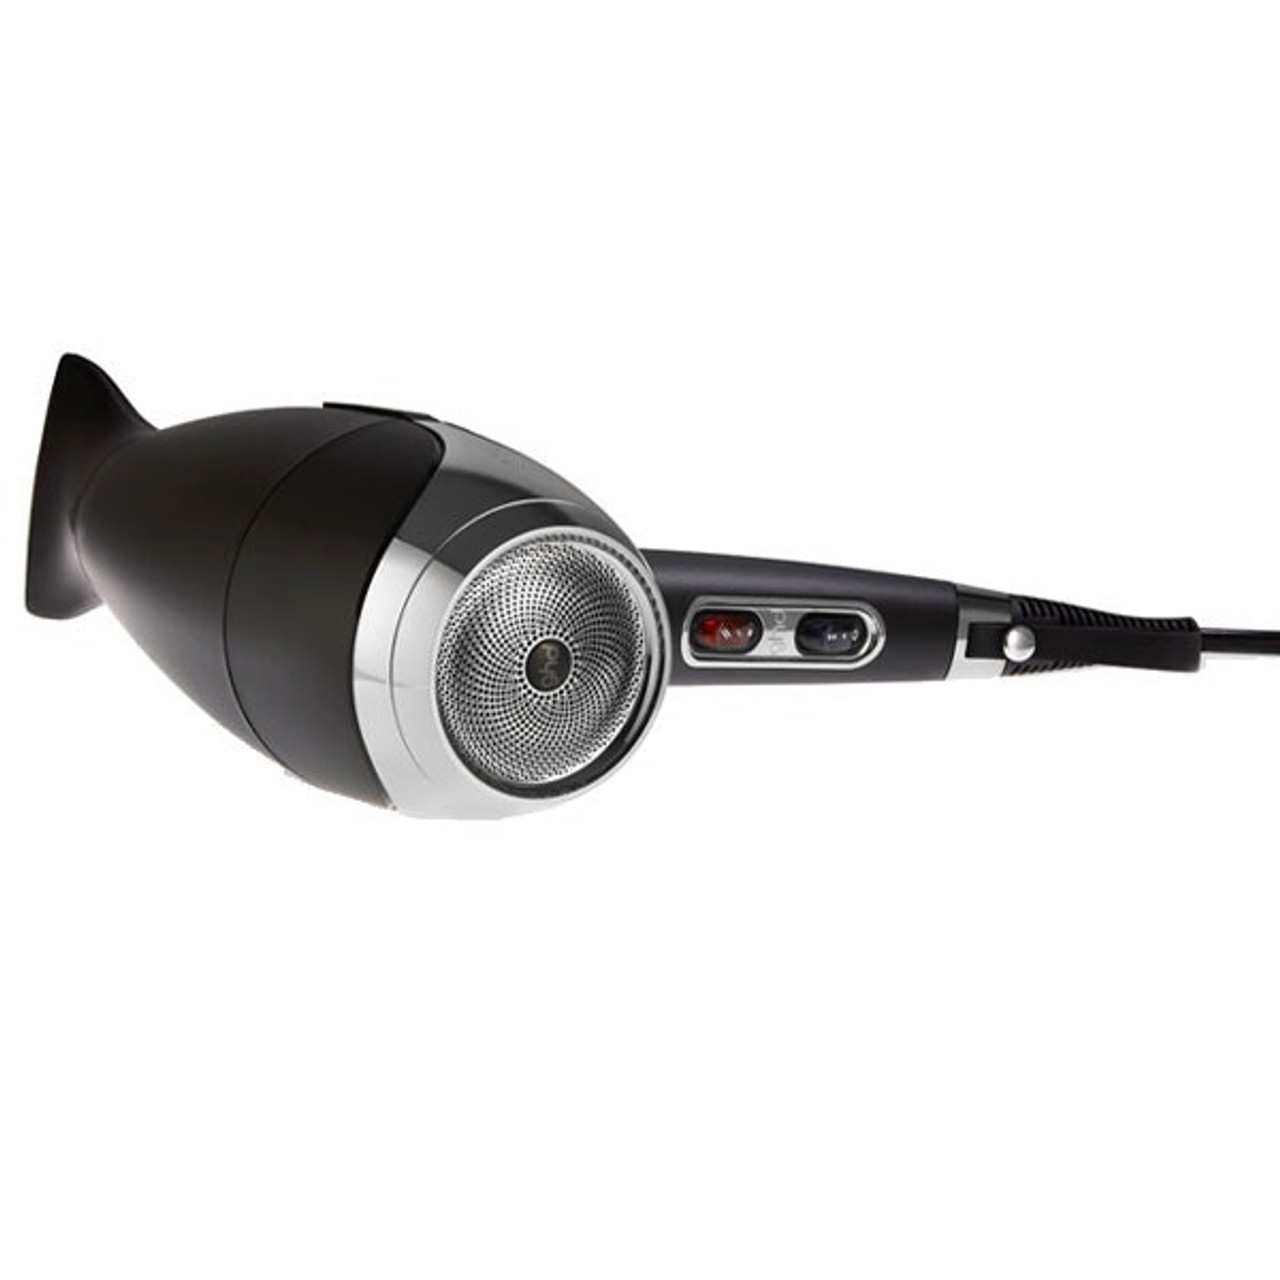 ghd helios Hair Dryer, Free Delivery